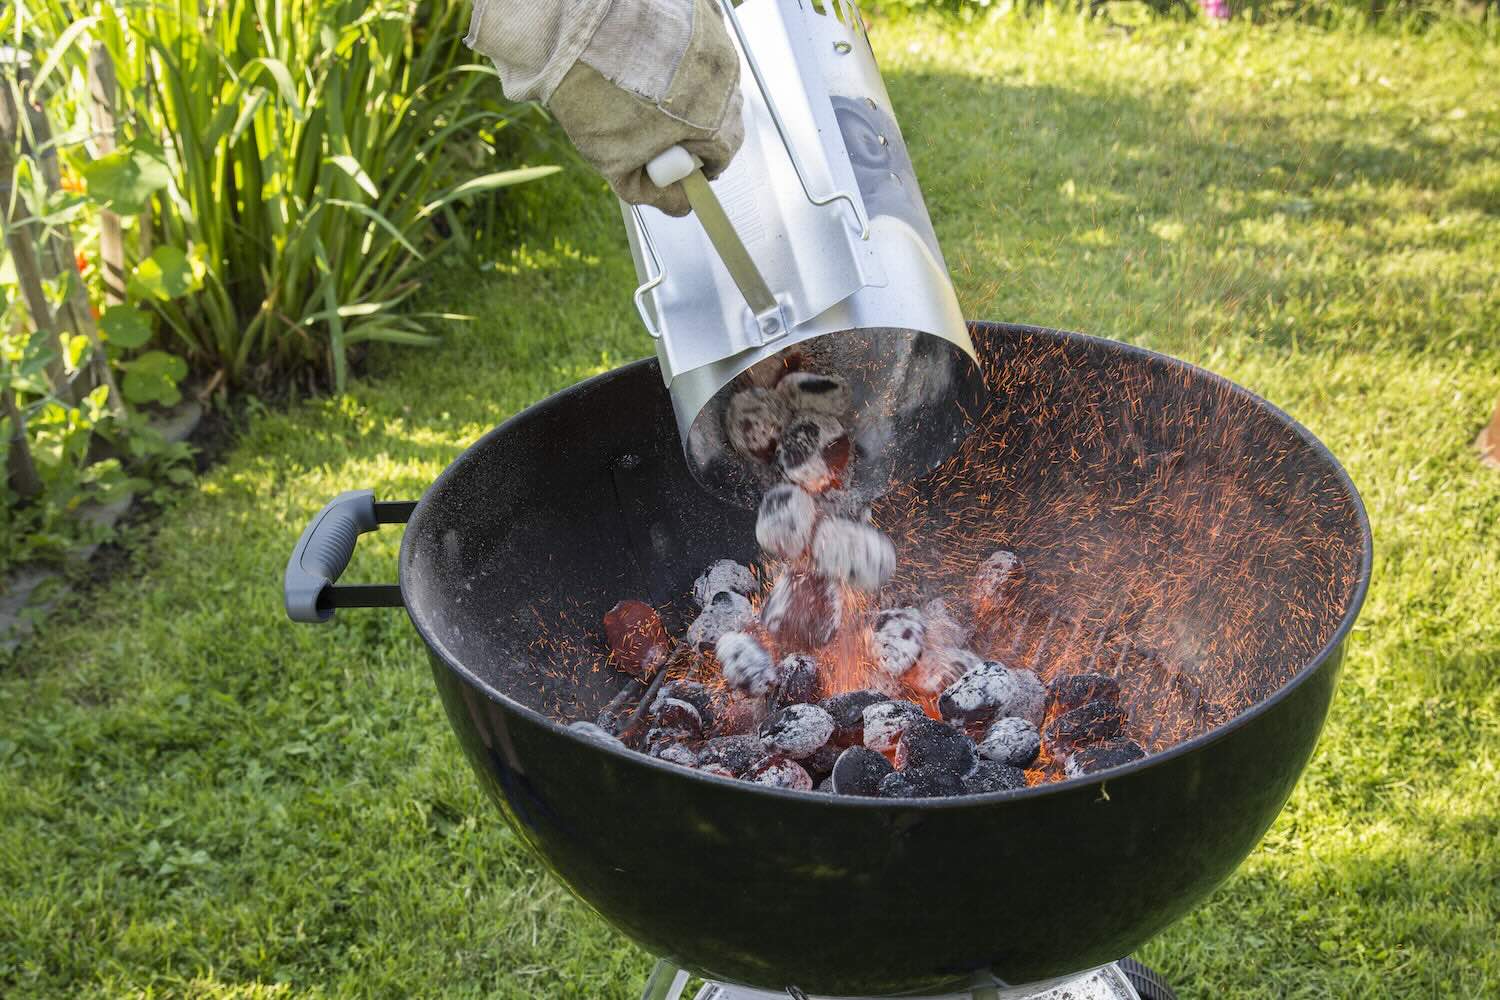 How To Start A Fire Pit Without Lighter Fluid